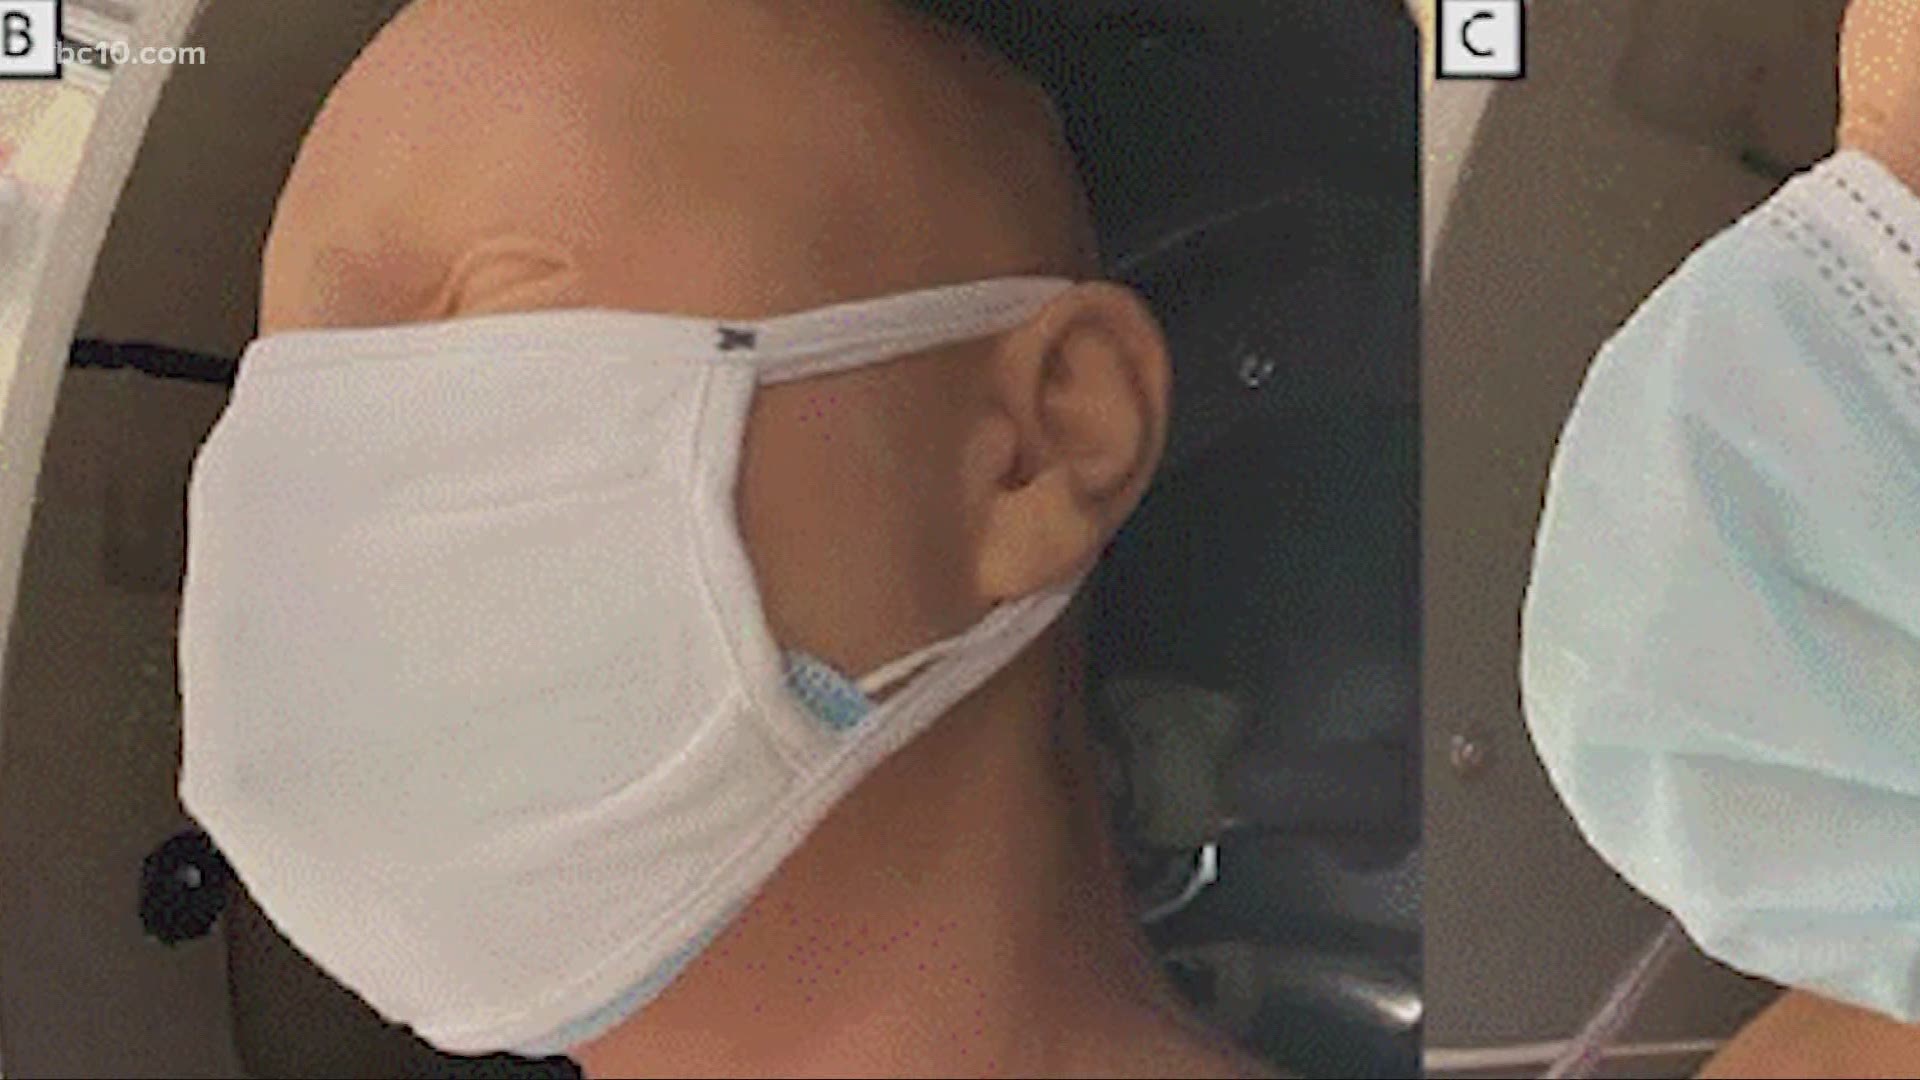 The CDC says a cloth mask worn over a surgical mask can tighten the gaps around the mask’s edges that can let virus particles in.